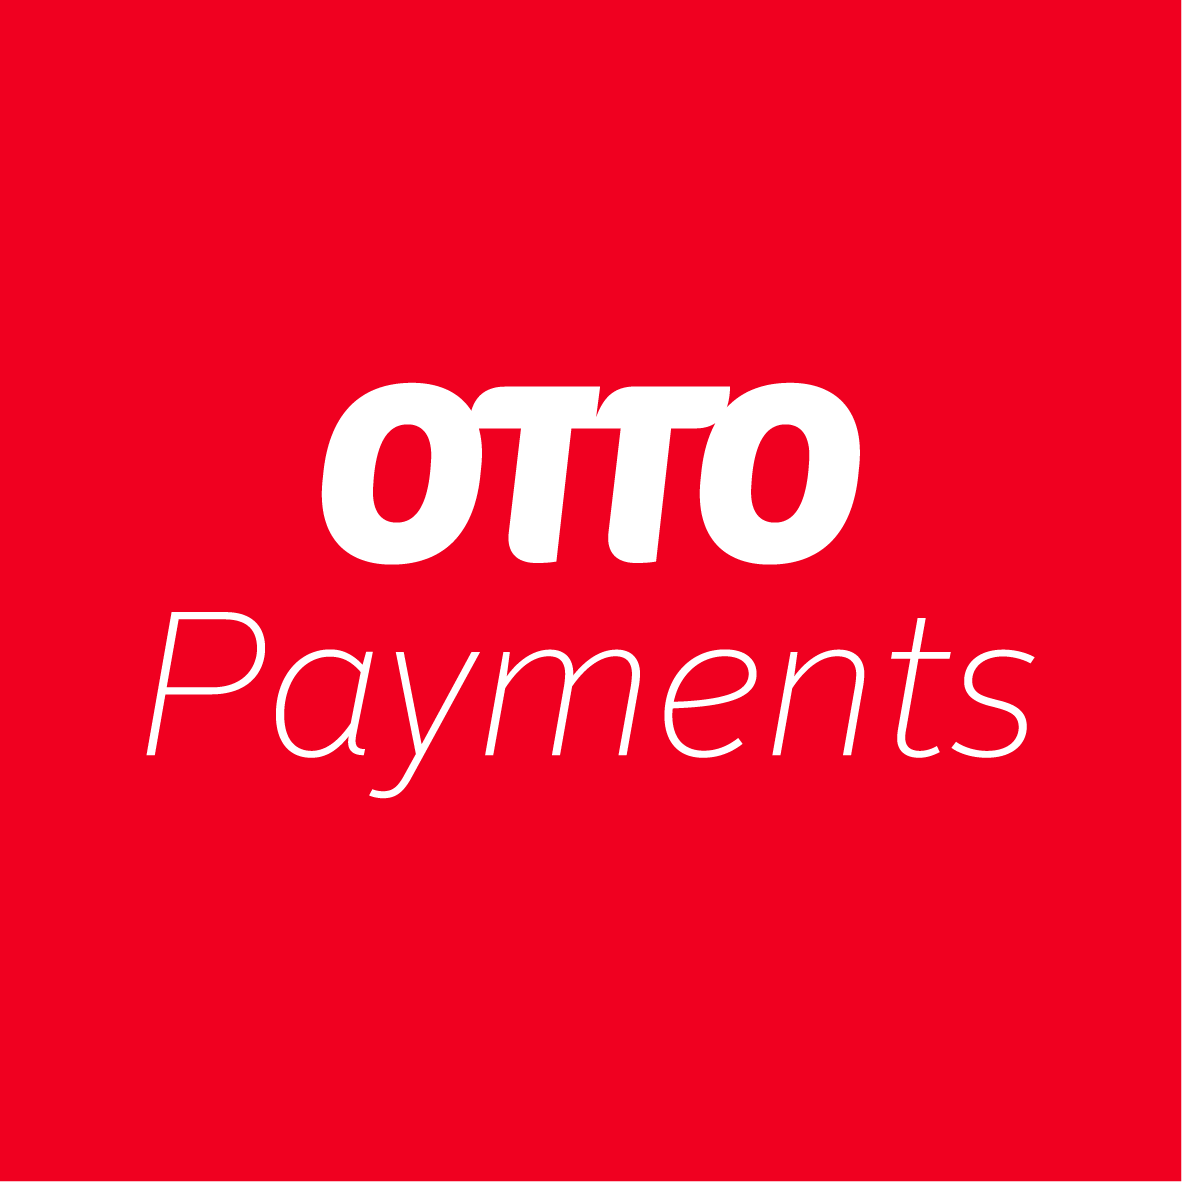 OTTO Payments